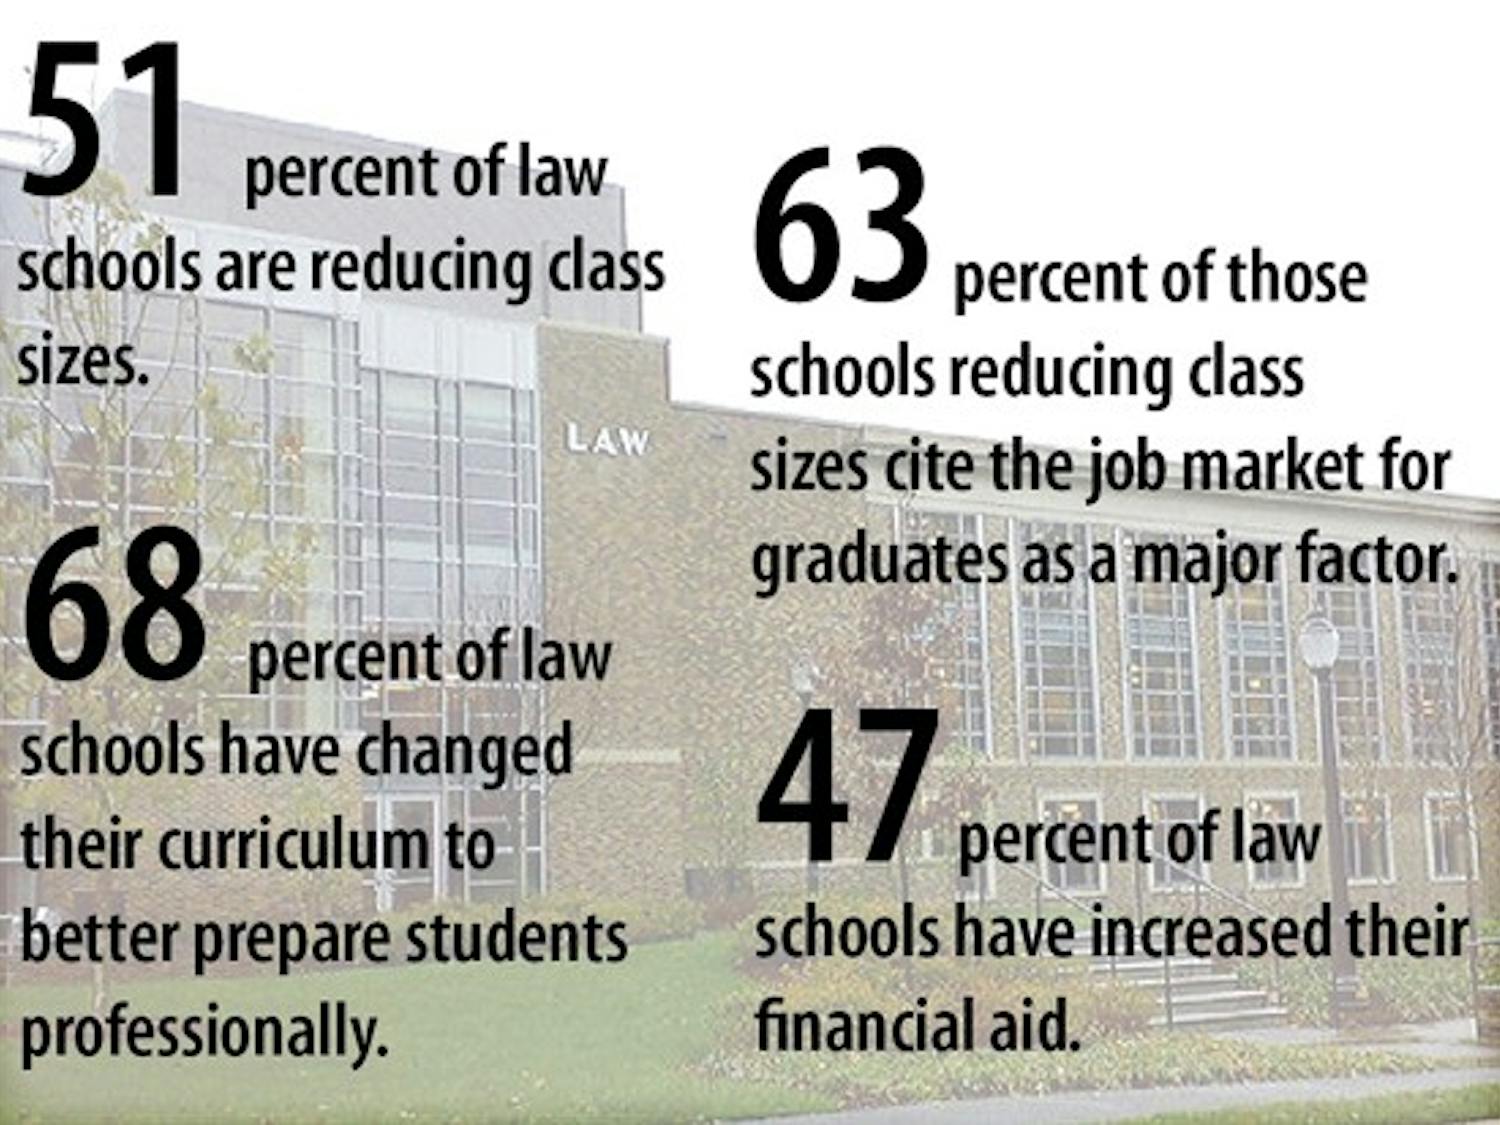 With law school students facing an increasingly challenging job market, many law schools are reducing their class sizes.